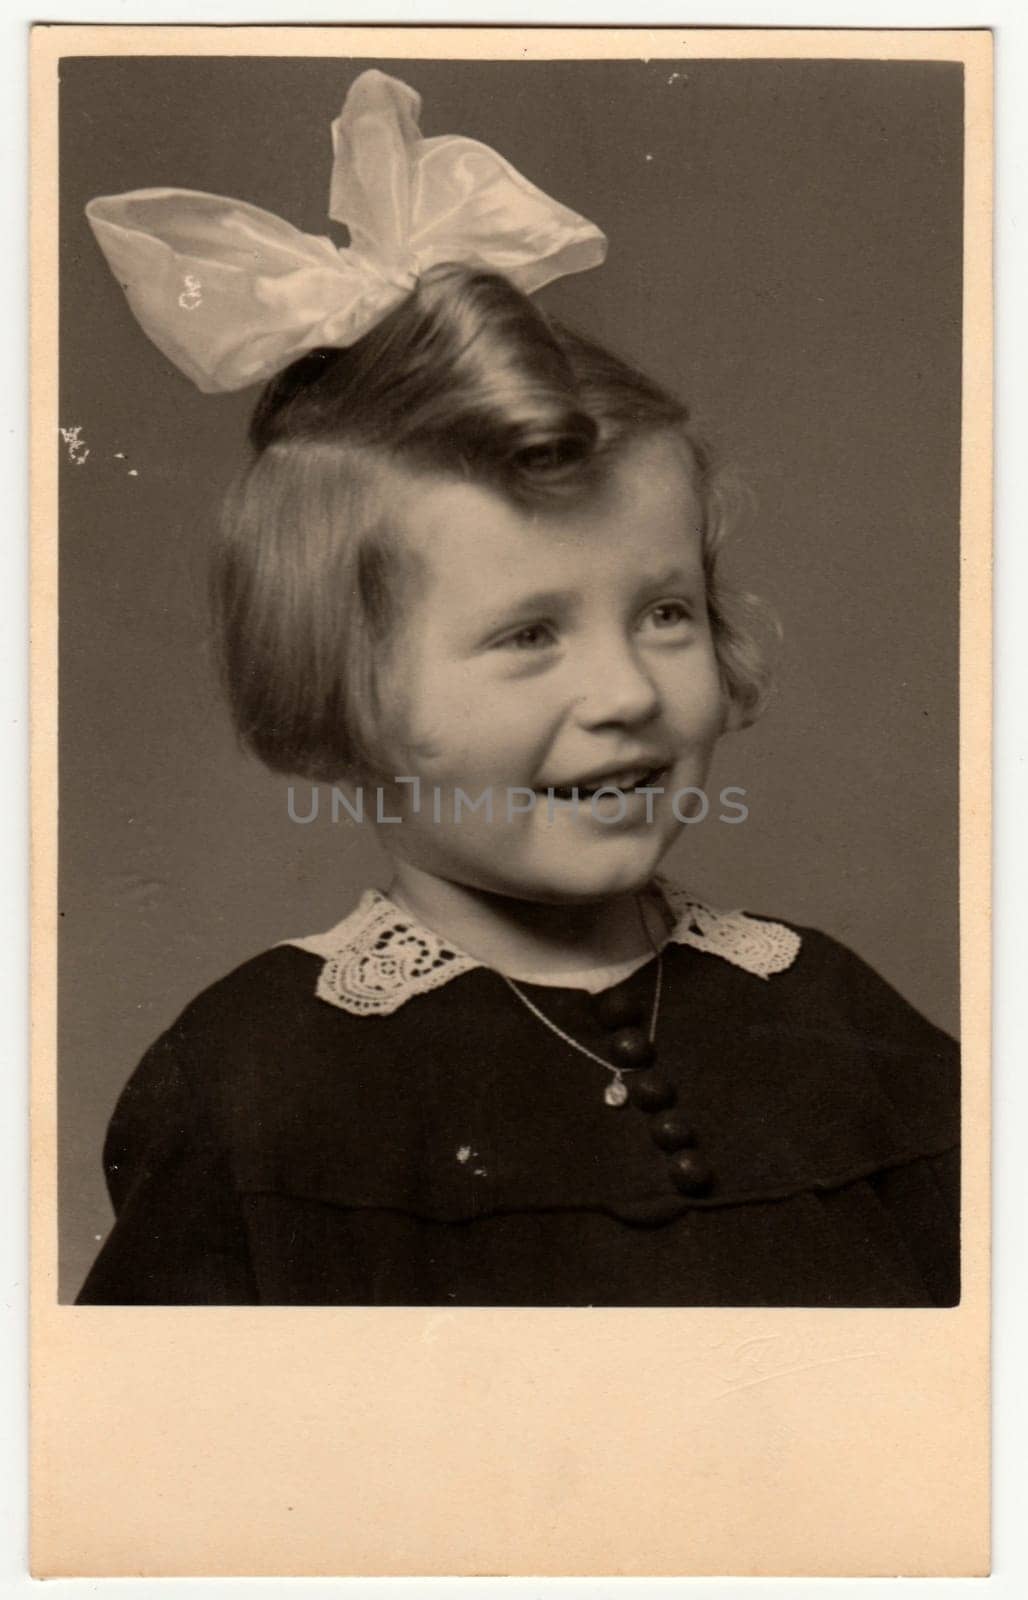 THE CZECHOSLOVAK REPUBLIC - CIRCA 1950s: Vintage photo shows a portrait of a small cute girl with ribbon in hair. Retro black and white photography. Circa 1950s.